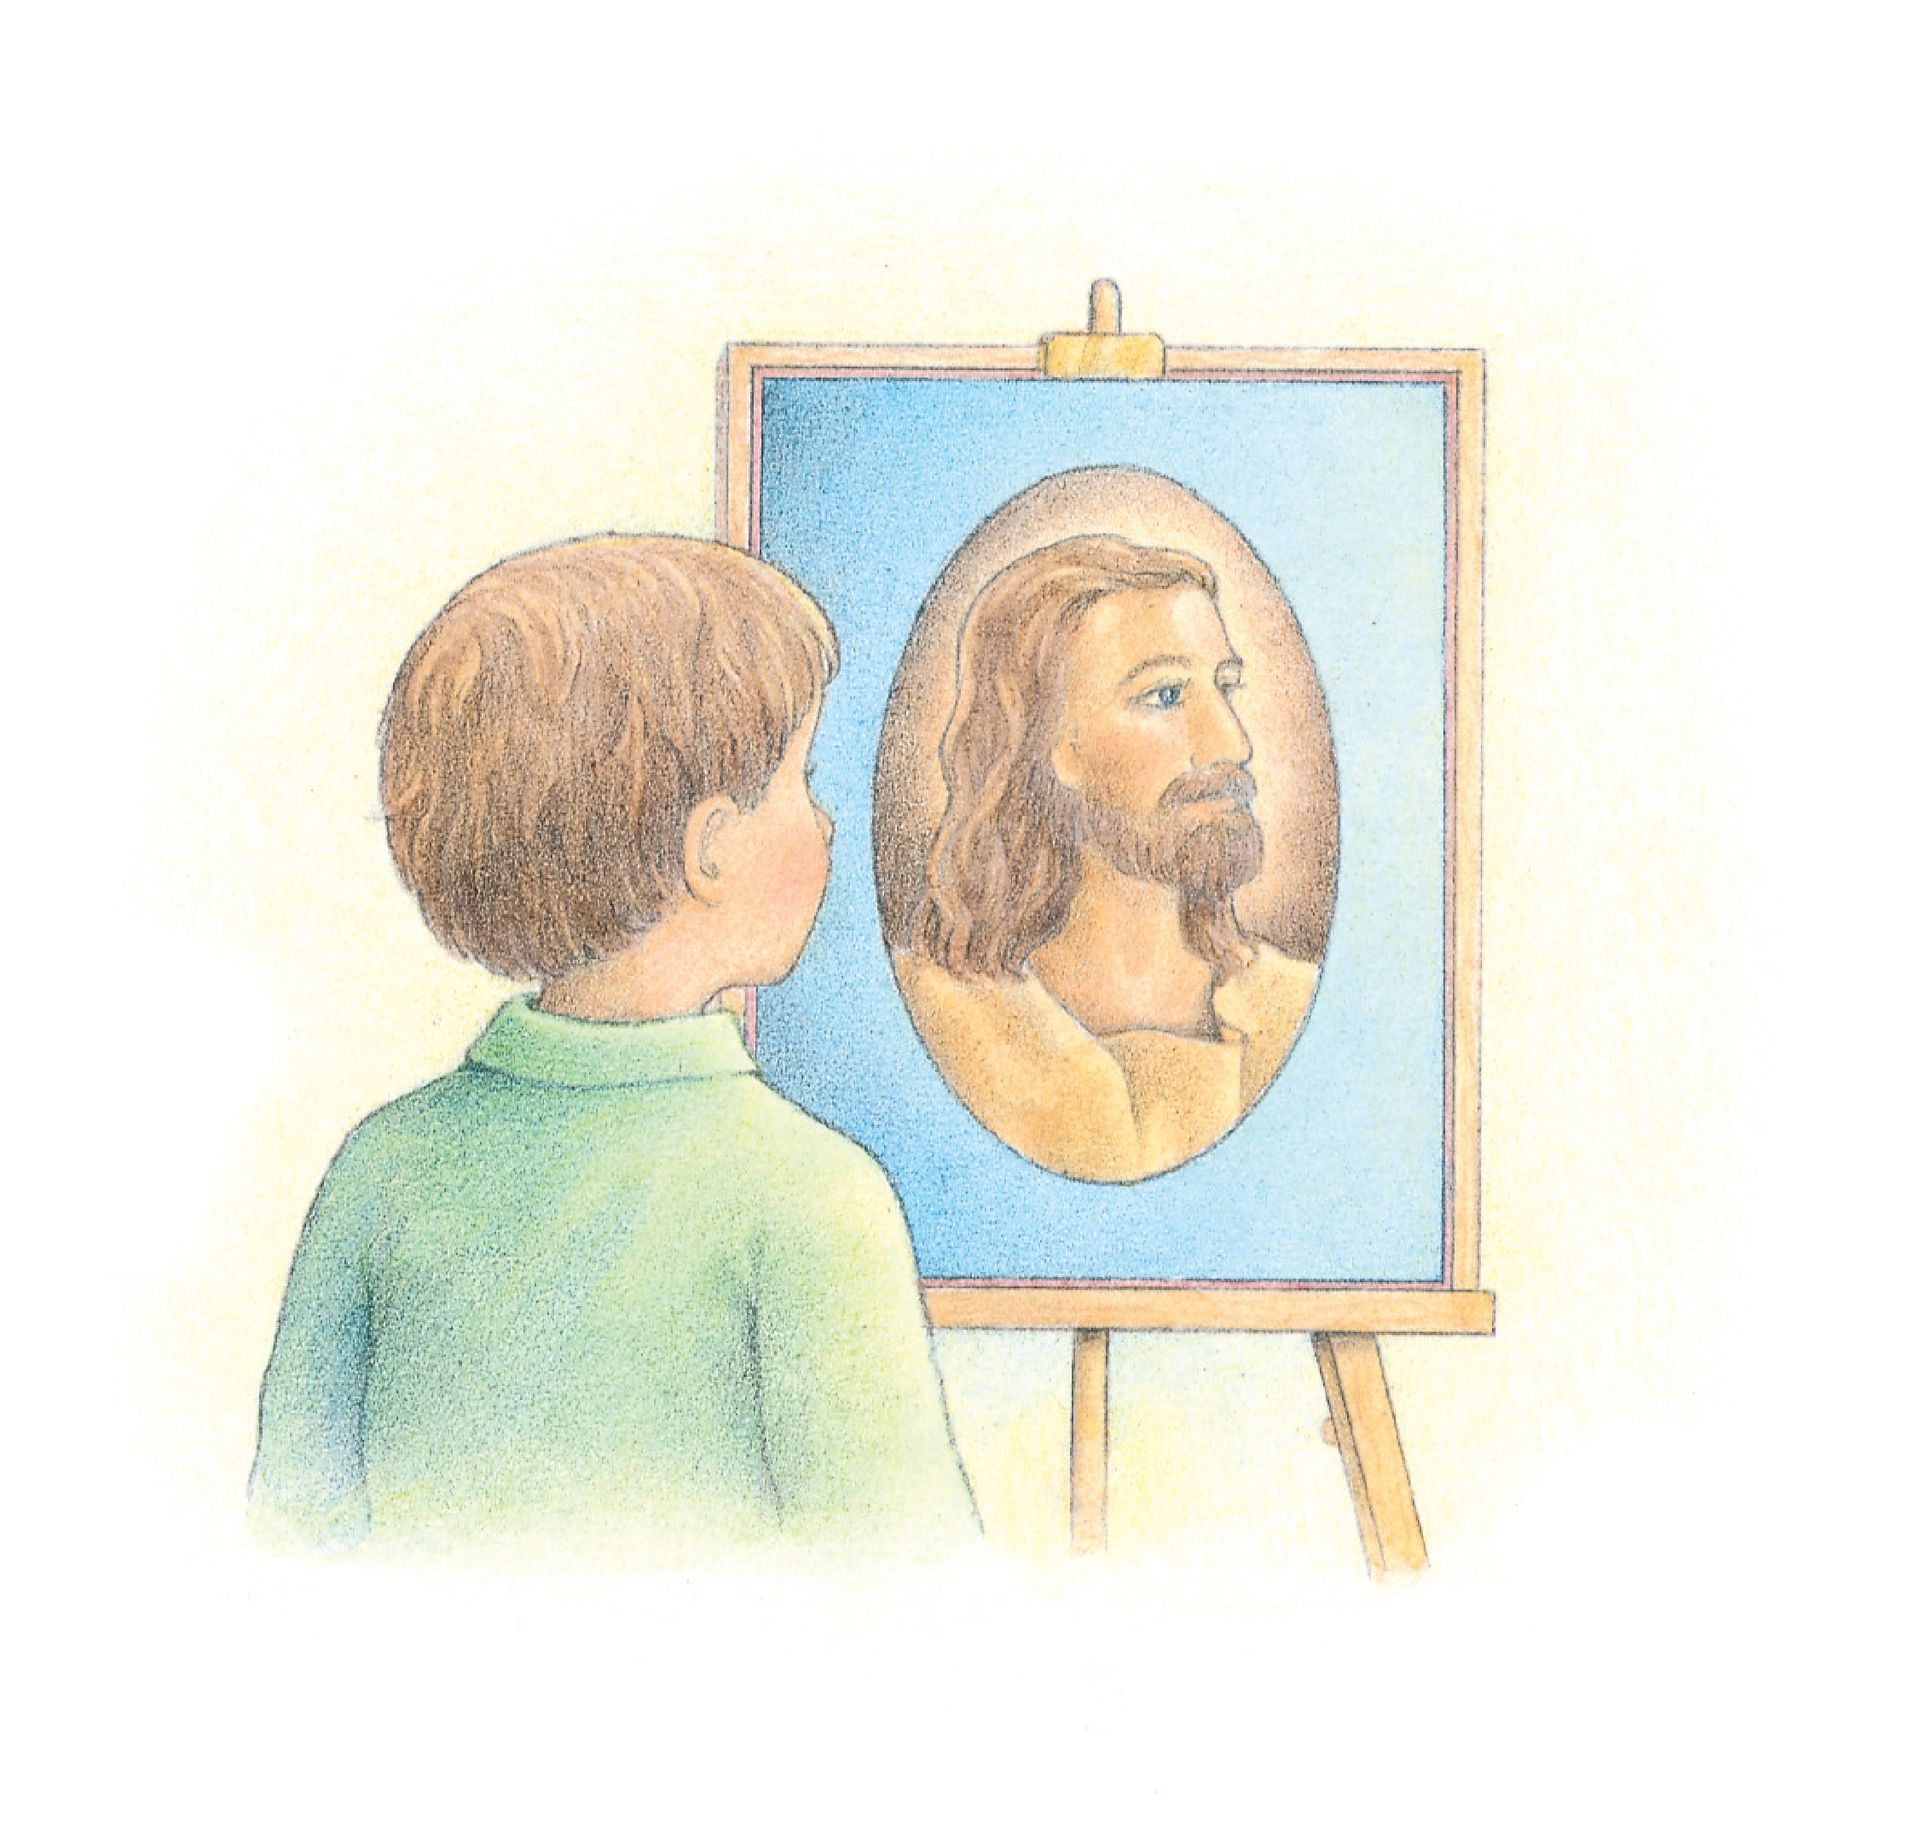 A boy standing and looking at a portrait of Christ. From the Children’s Songbook, page 160, “Choose the Right Way”; watercolor illustration by Beth Whittaker.